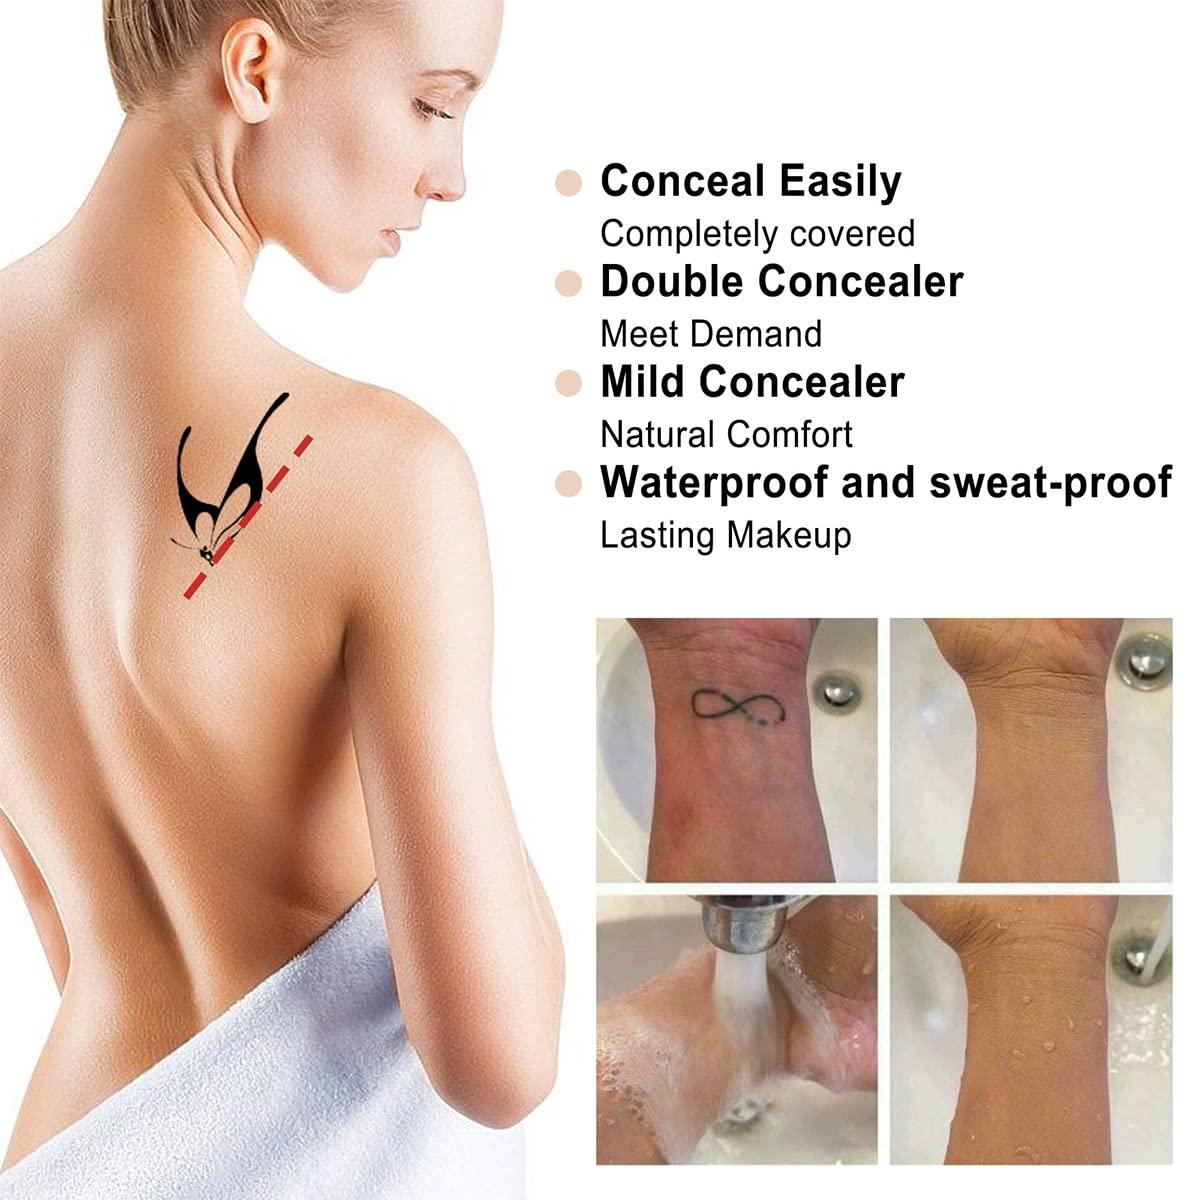 Tattoo Cover Up, Makeup Waterproof, Tattoo Concealer, Scar Cover Up Makeup  Waterproof, Professional Skin Concealer Set for Dark Spots, Scars,  Vitiligo, Body Makeup Cover and Body Tattoo Concealer.